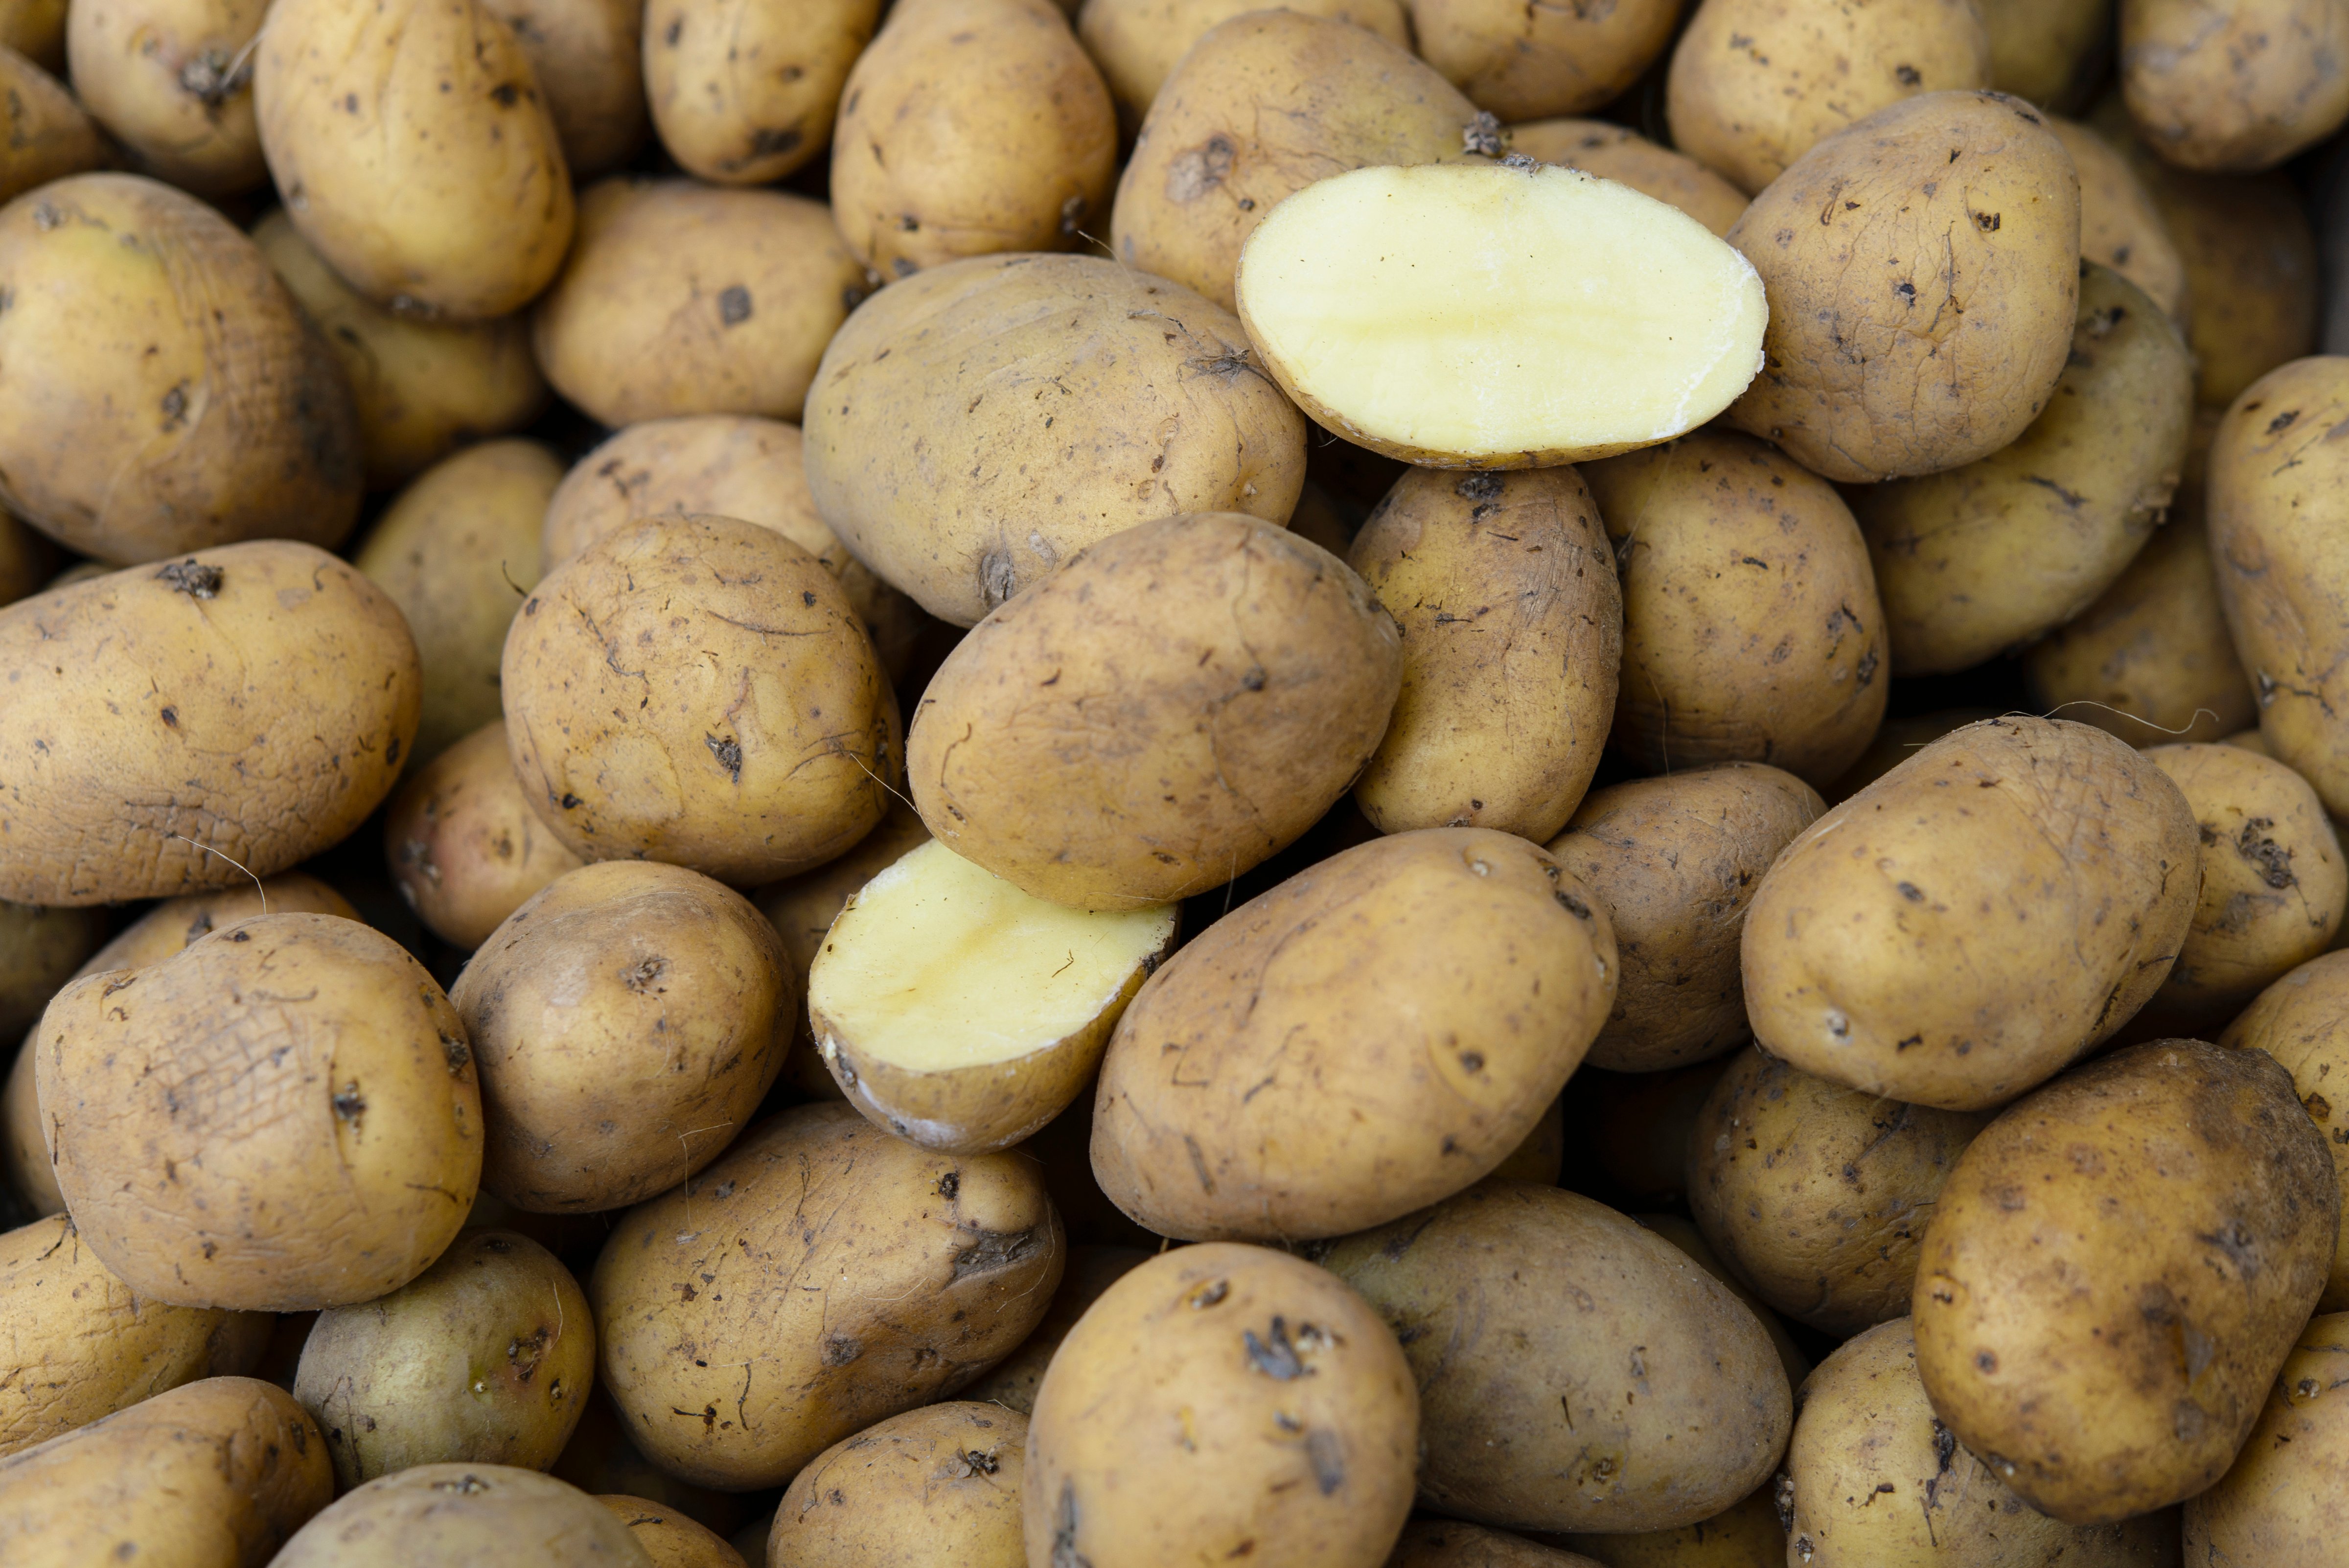 Potatoes seen at the biannual gardeners' market at the Botanical Gardens in Berlin, Germany. (Clemens Bilan&mdash;Getty Images)